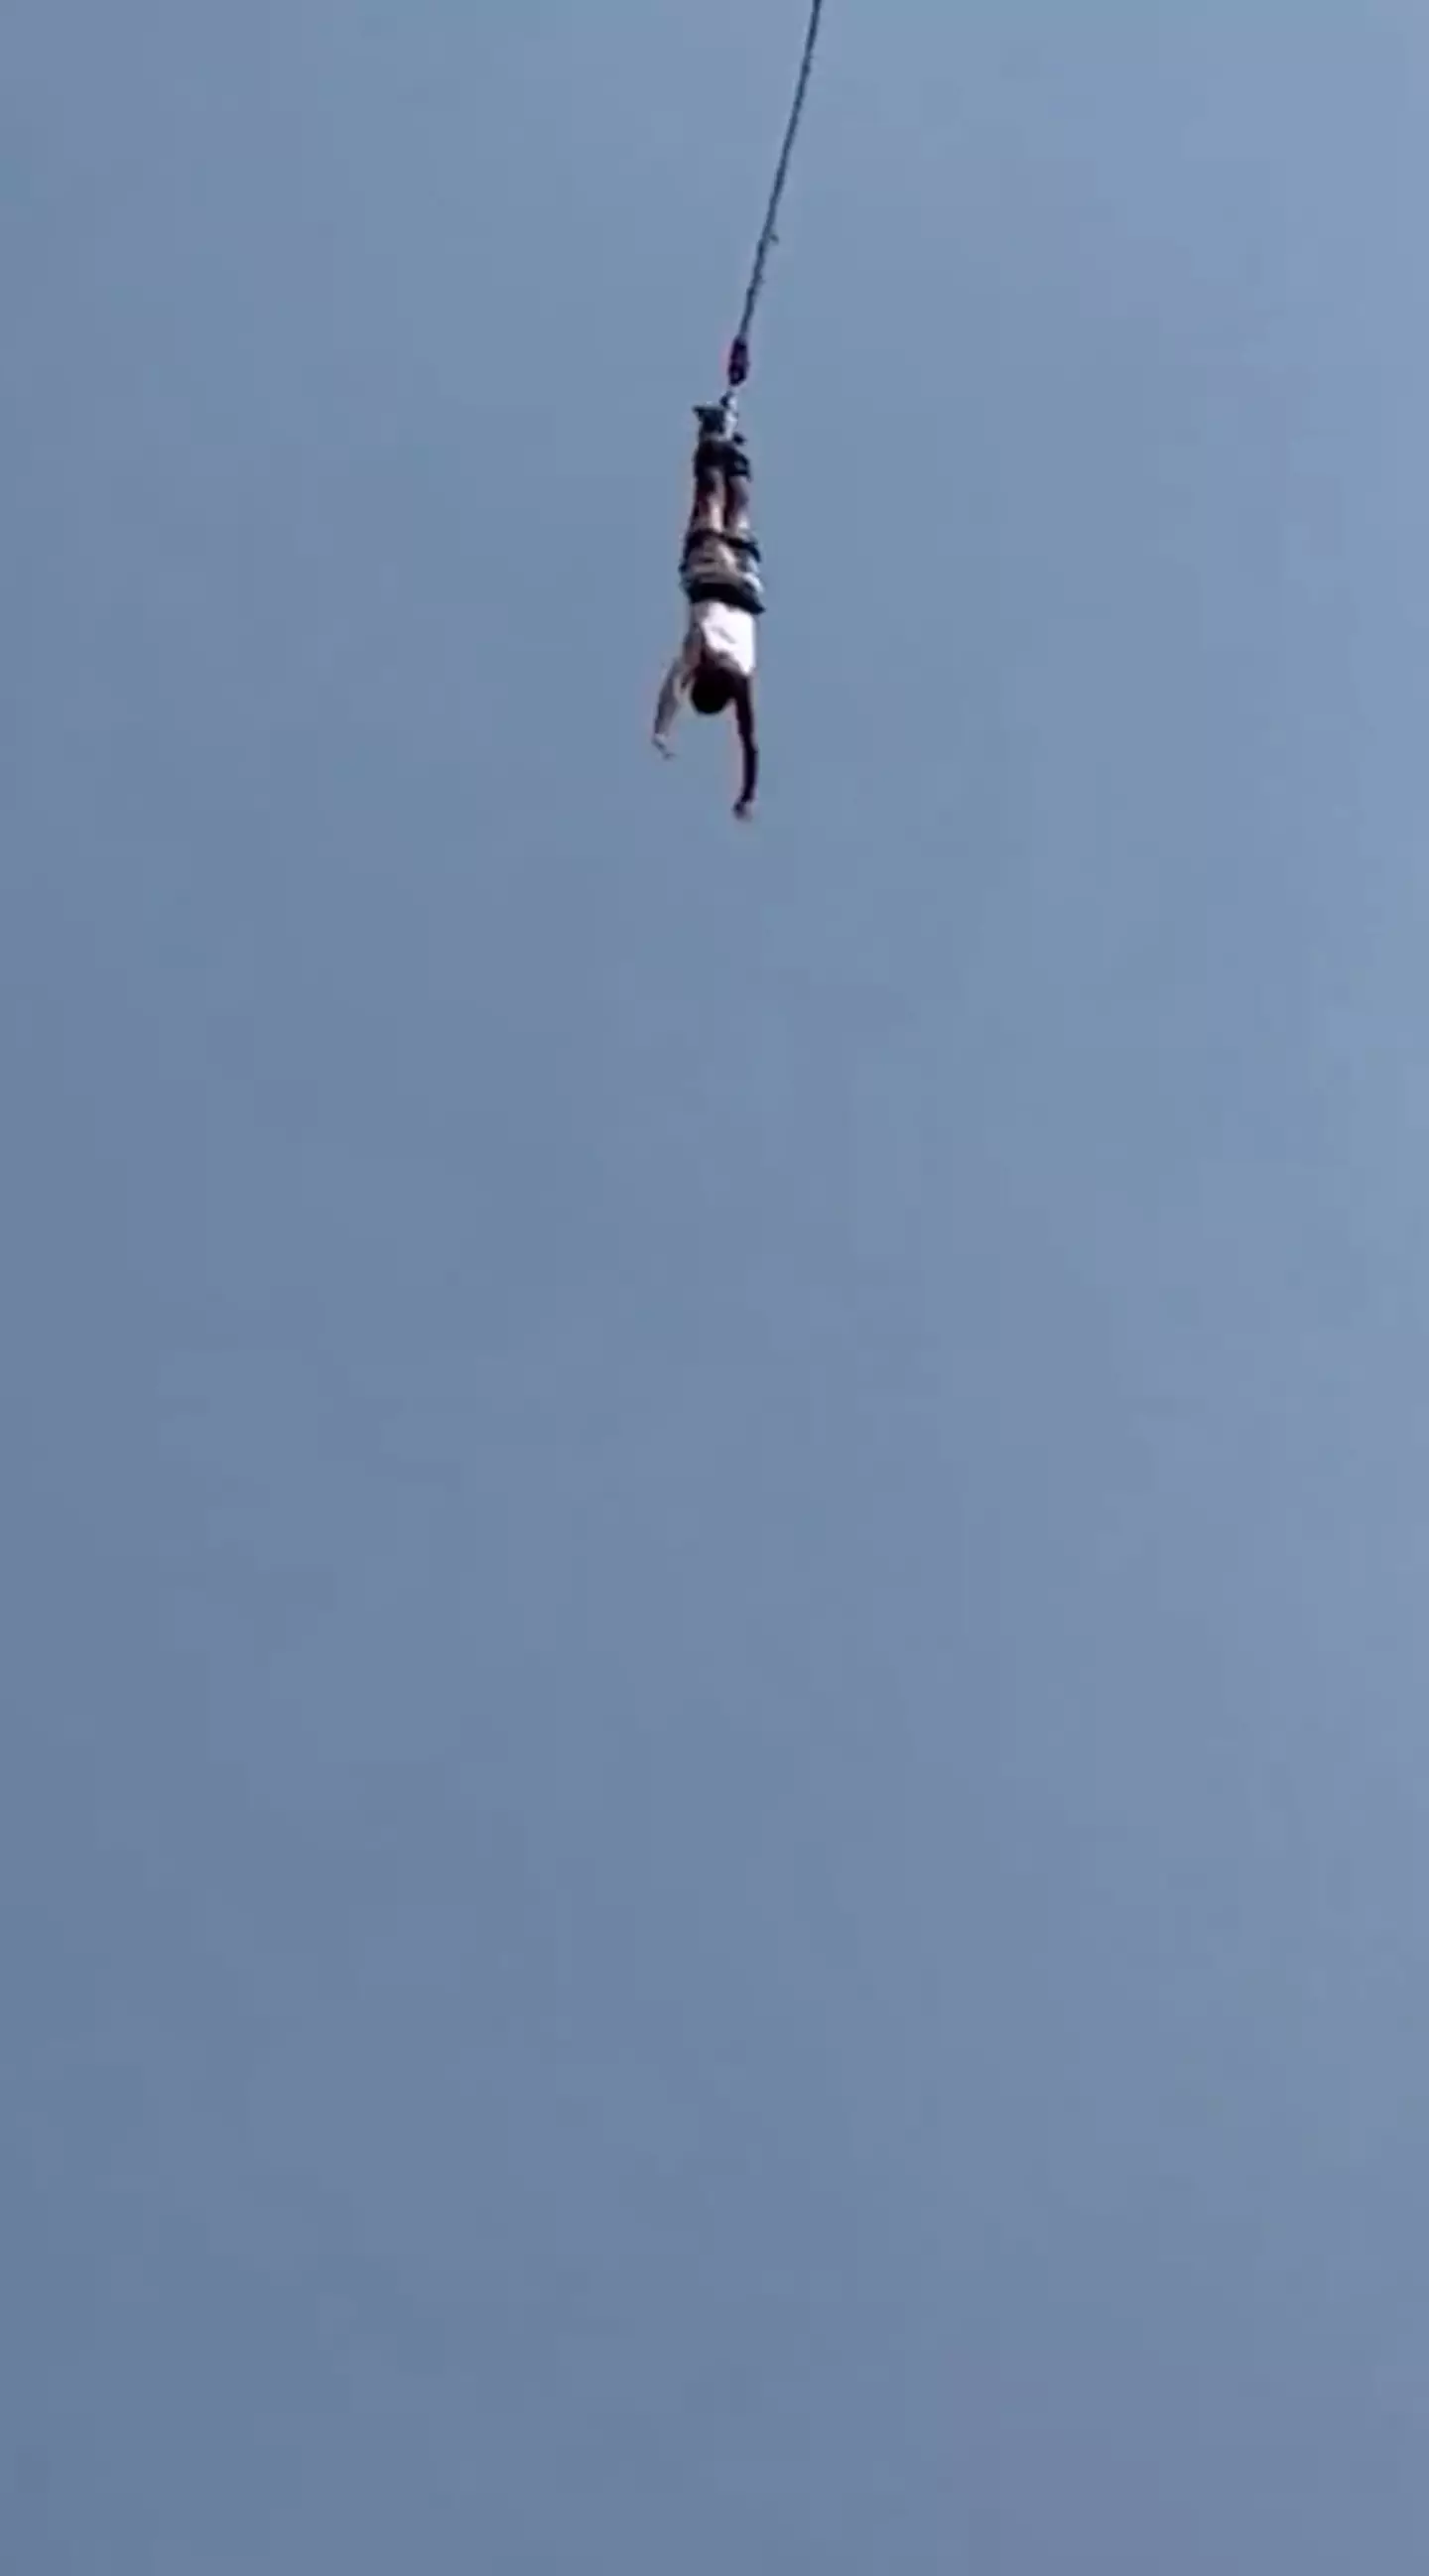 The tourist identified as Mike decided to try bungee jumping.